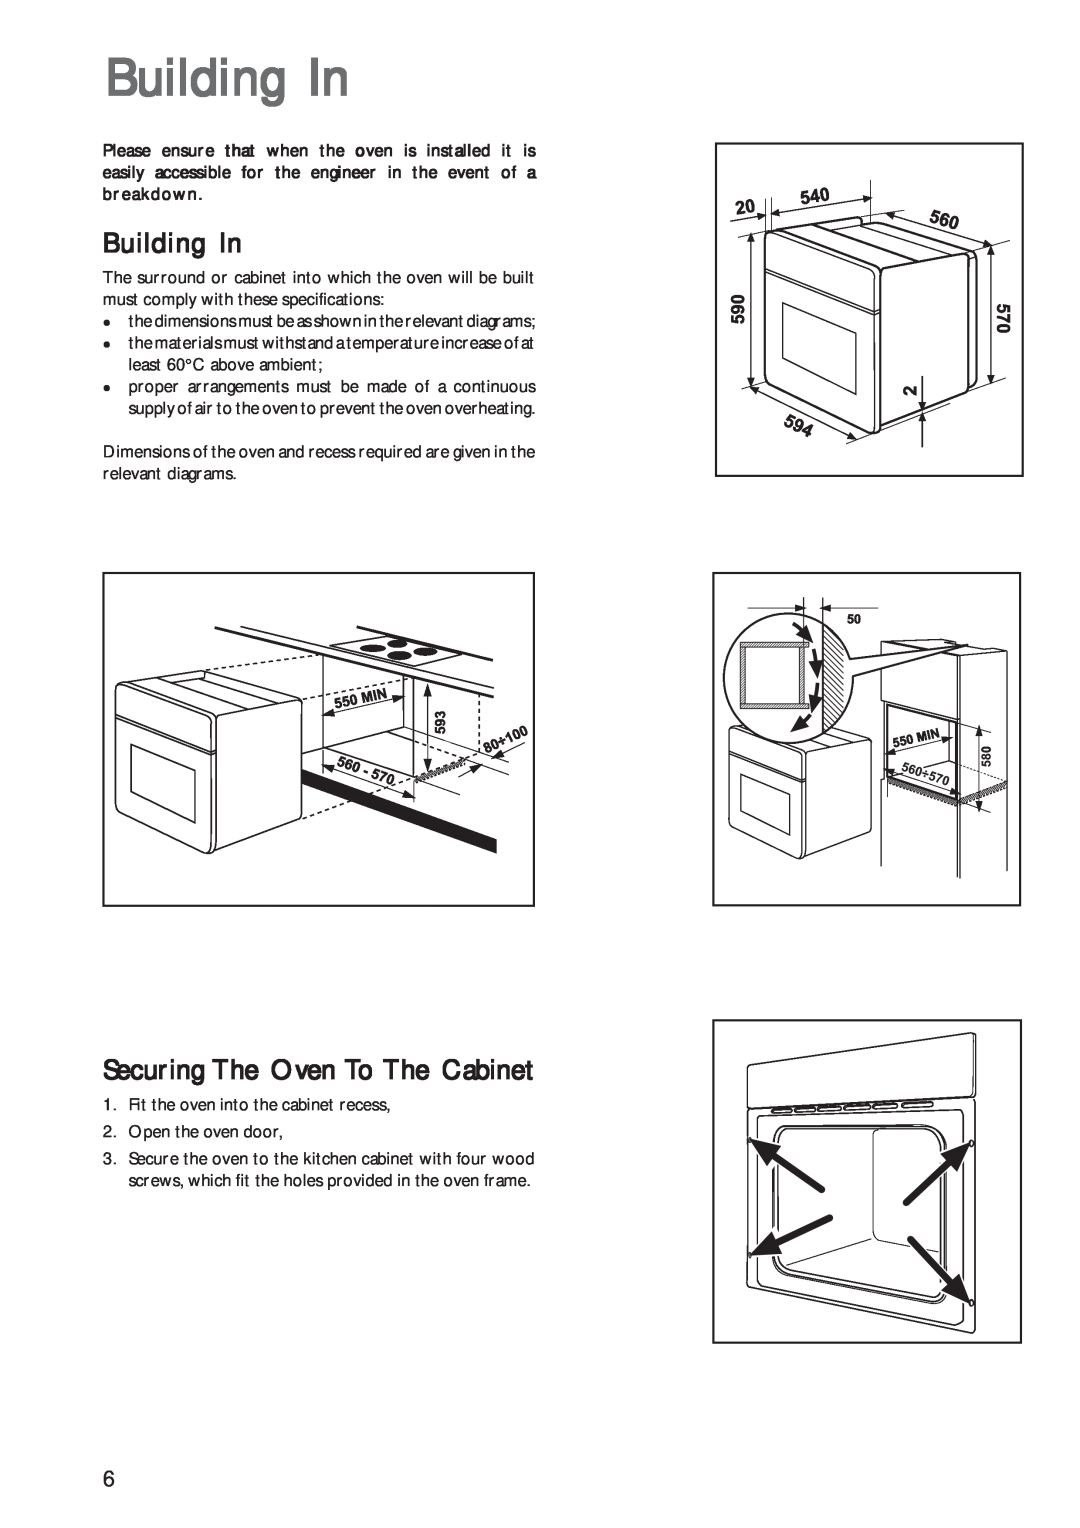 John Lewis JLBIOS602 instruction manual Building In, Securing The Oven To The Cabinet 